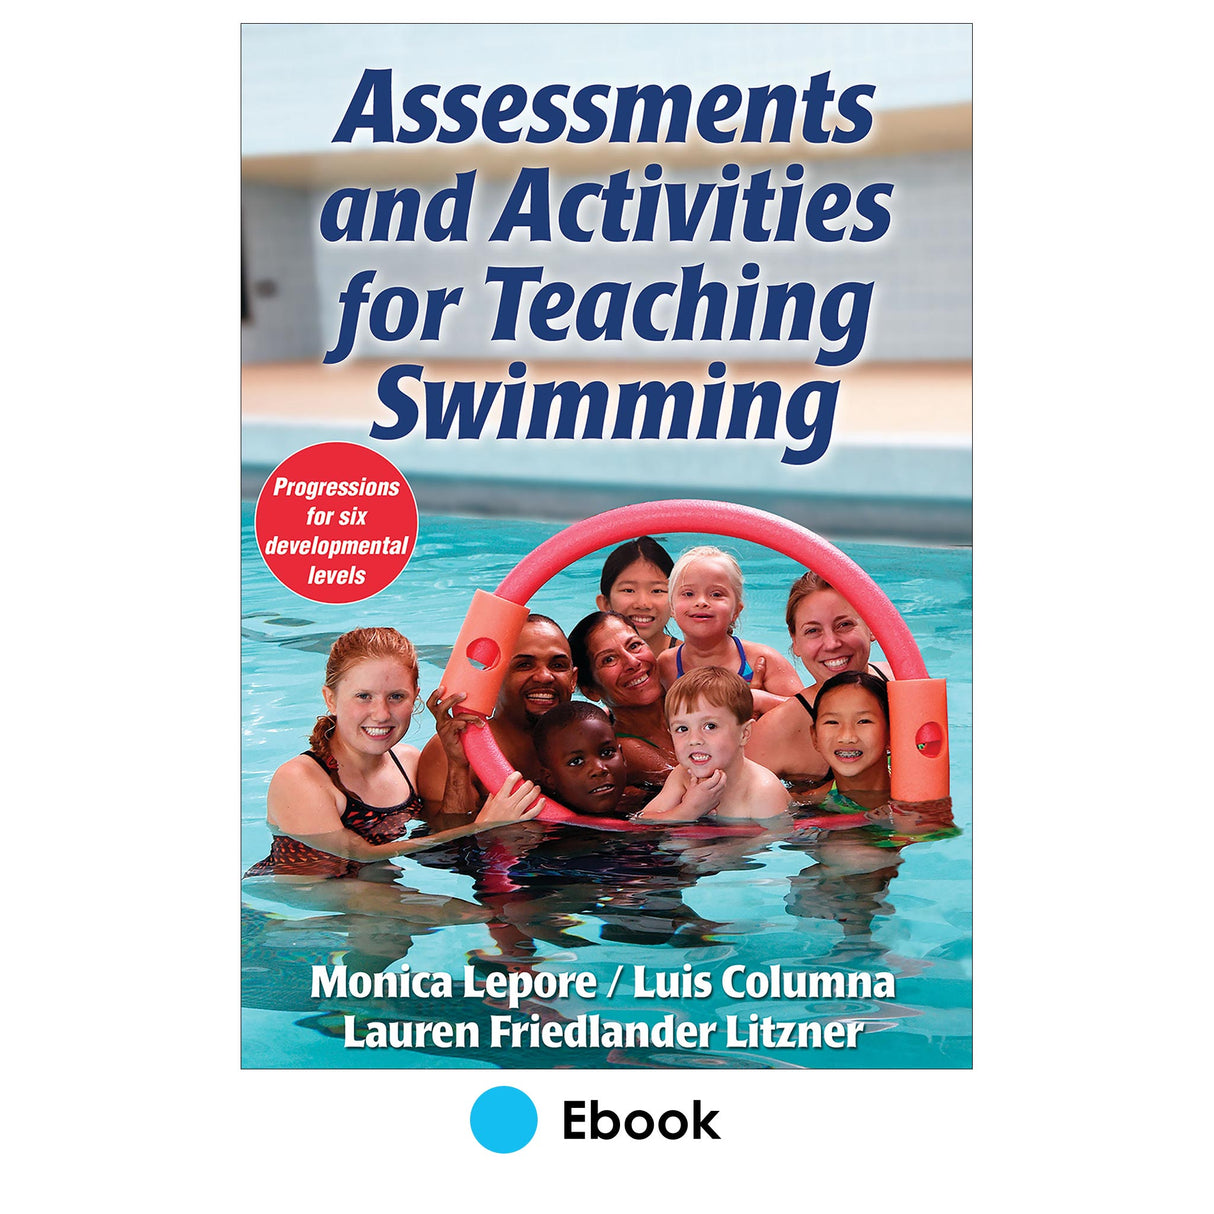 Assessments and Activities for Teaching Swimming PDF